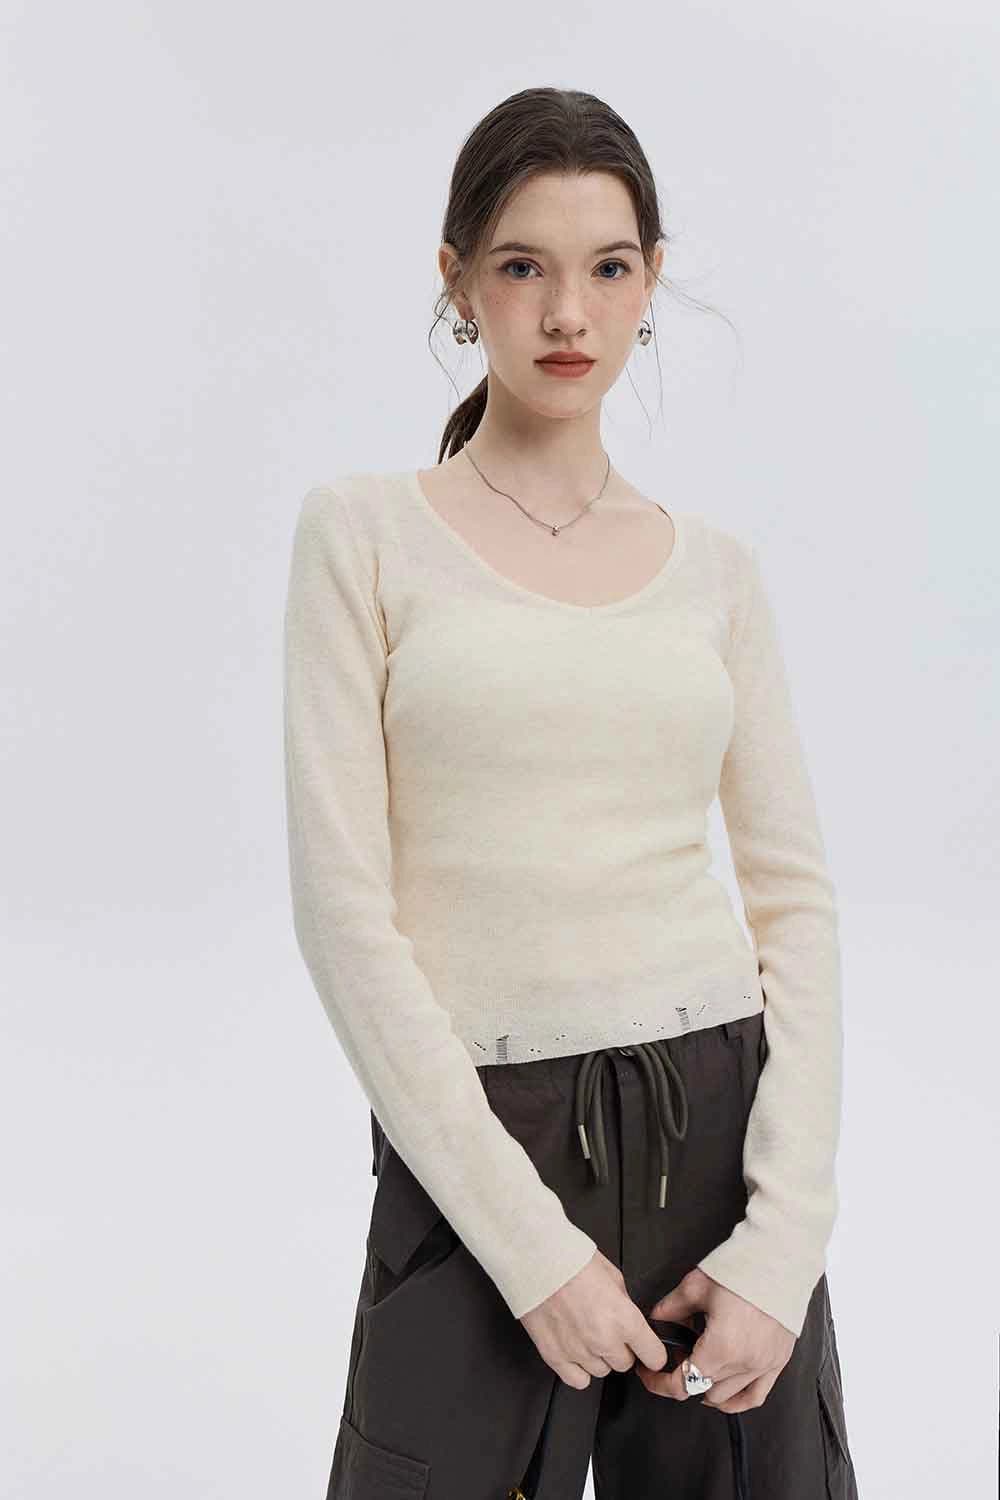 Classic Long Sleeve Knit Top with V-Neck Design